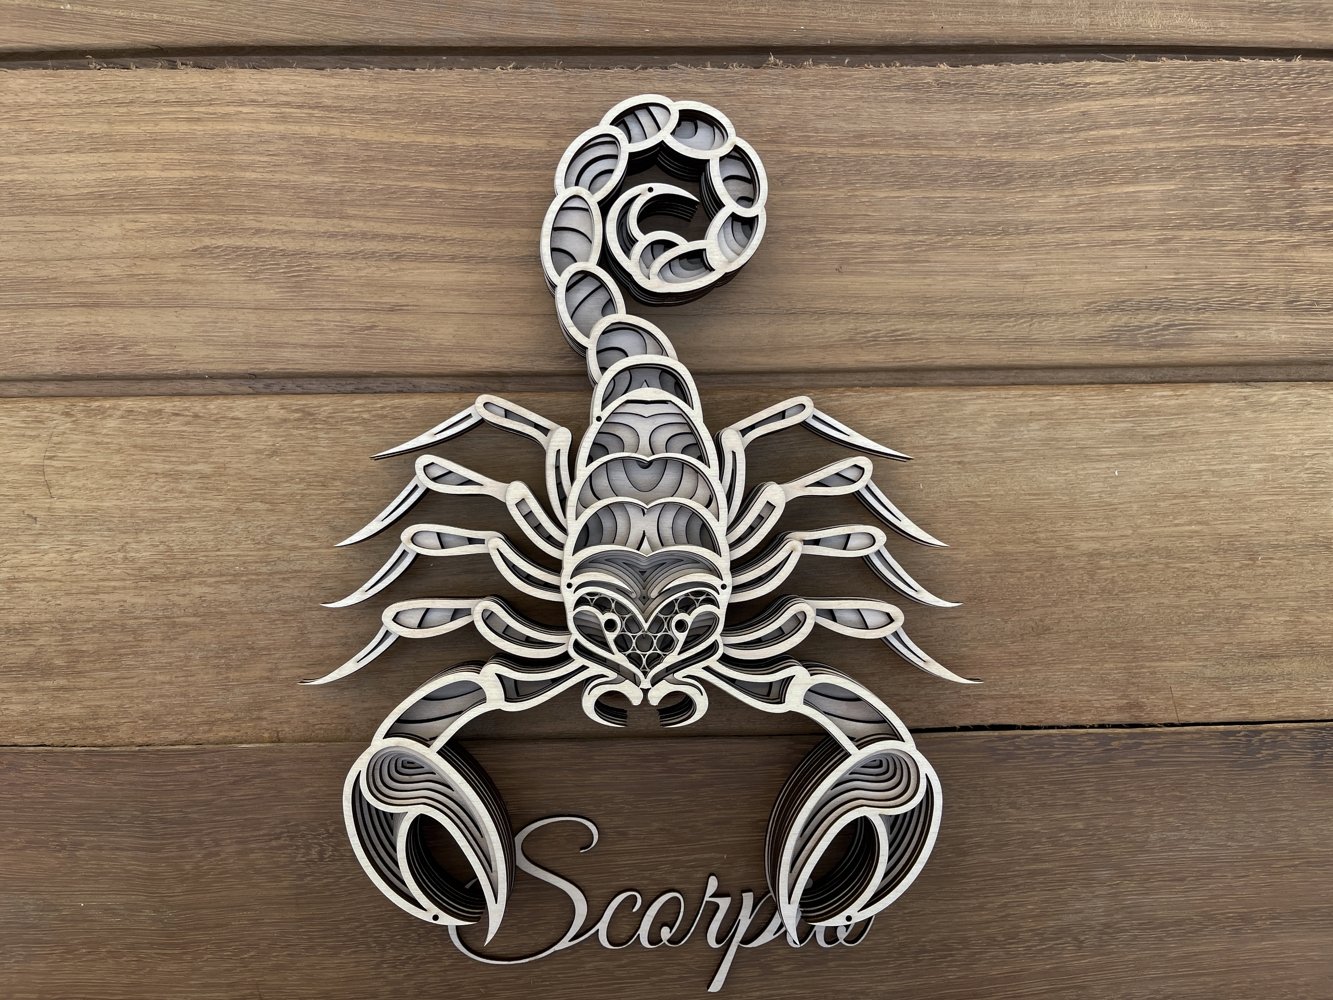 Metal scorpion on a wooden surface.